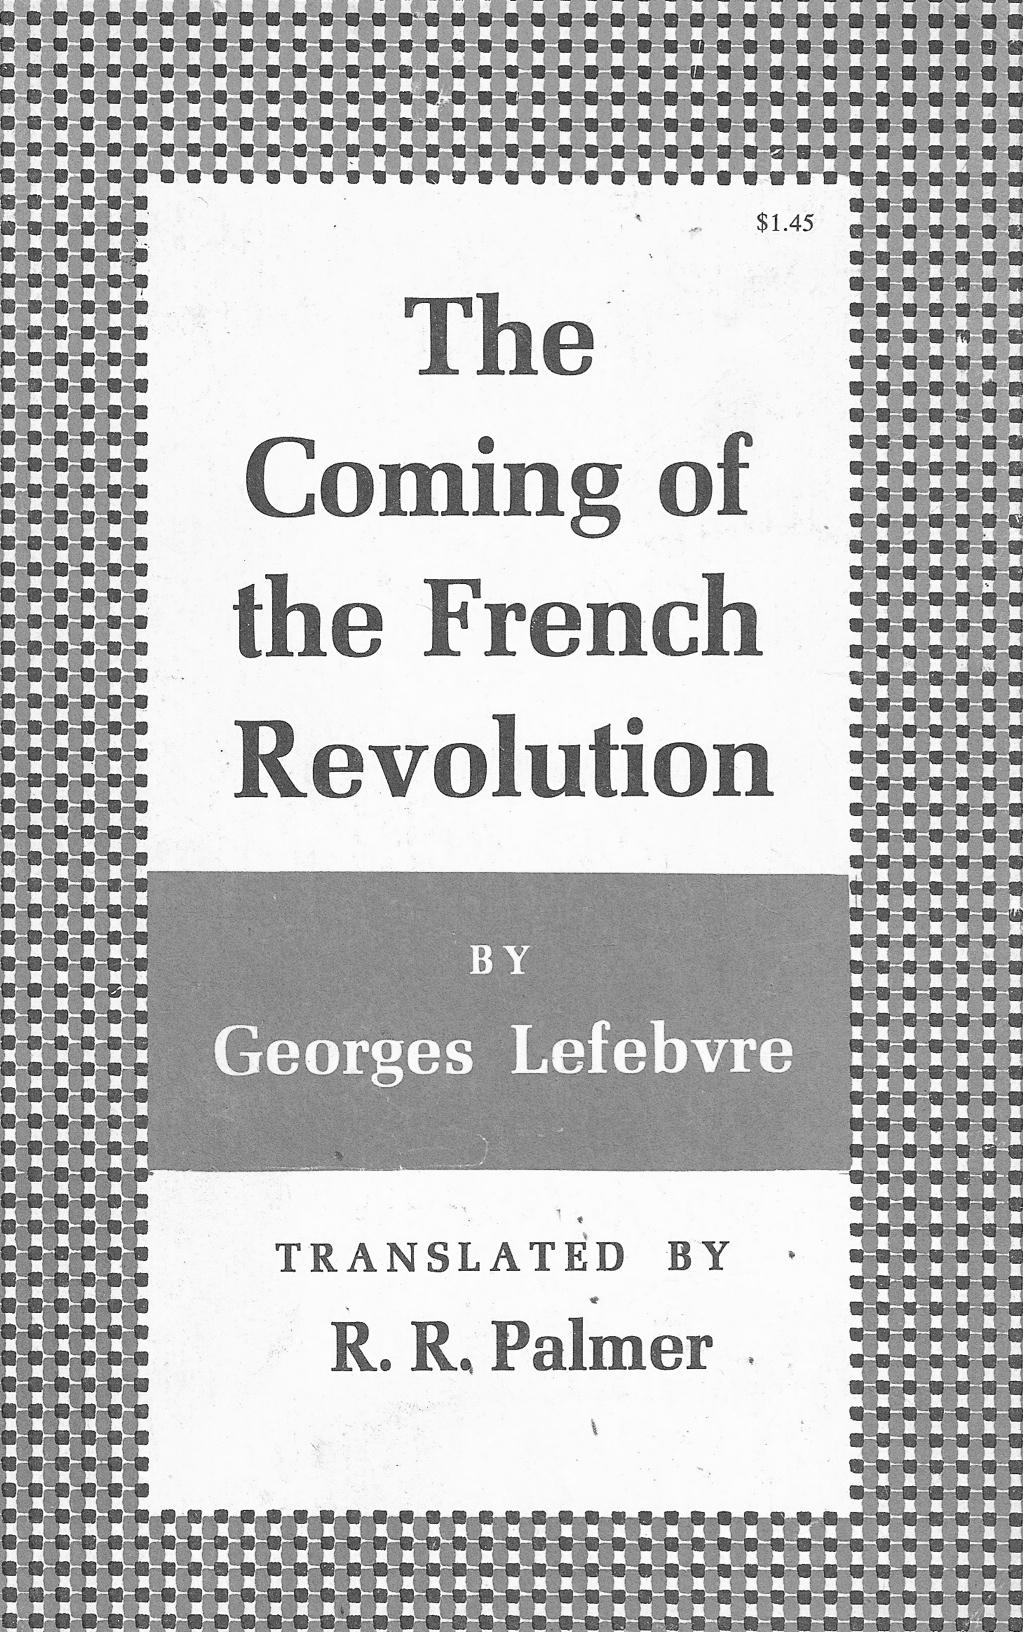 The Storming of the Bastille: Reflections On Thus fell the Bastille, through the ineptitude of its governor [BernardRené de Launay], the defection of royal troops and the heroic tenacity of a few